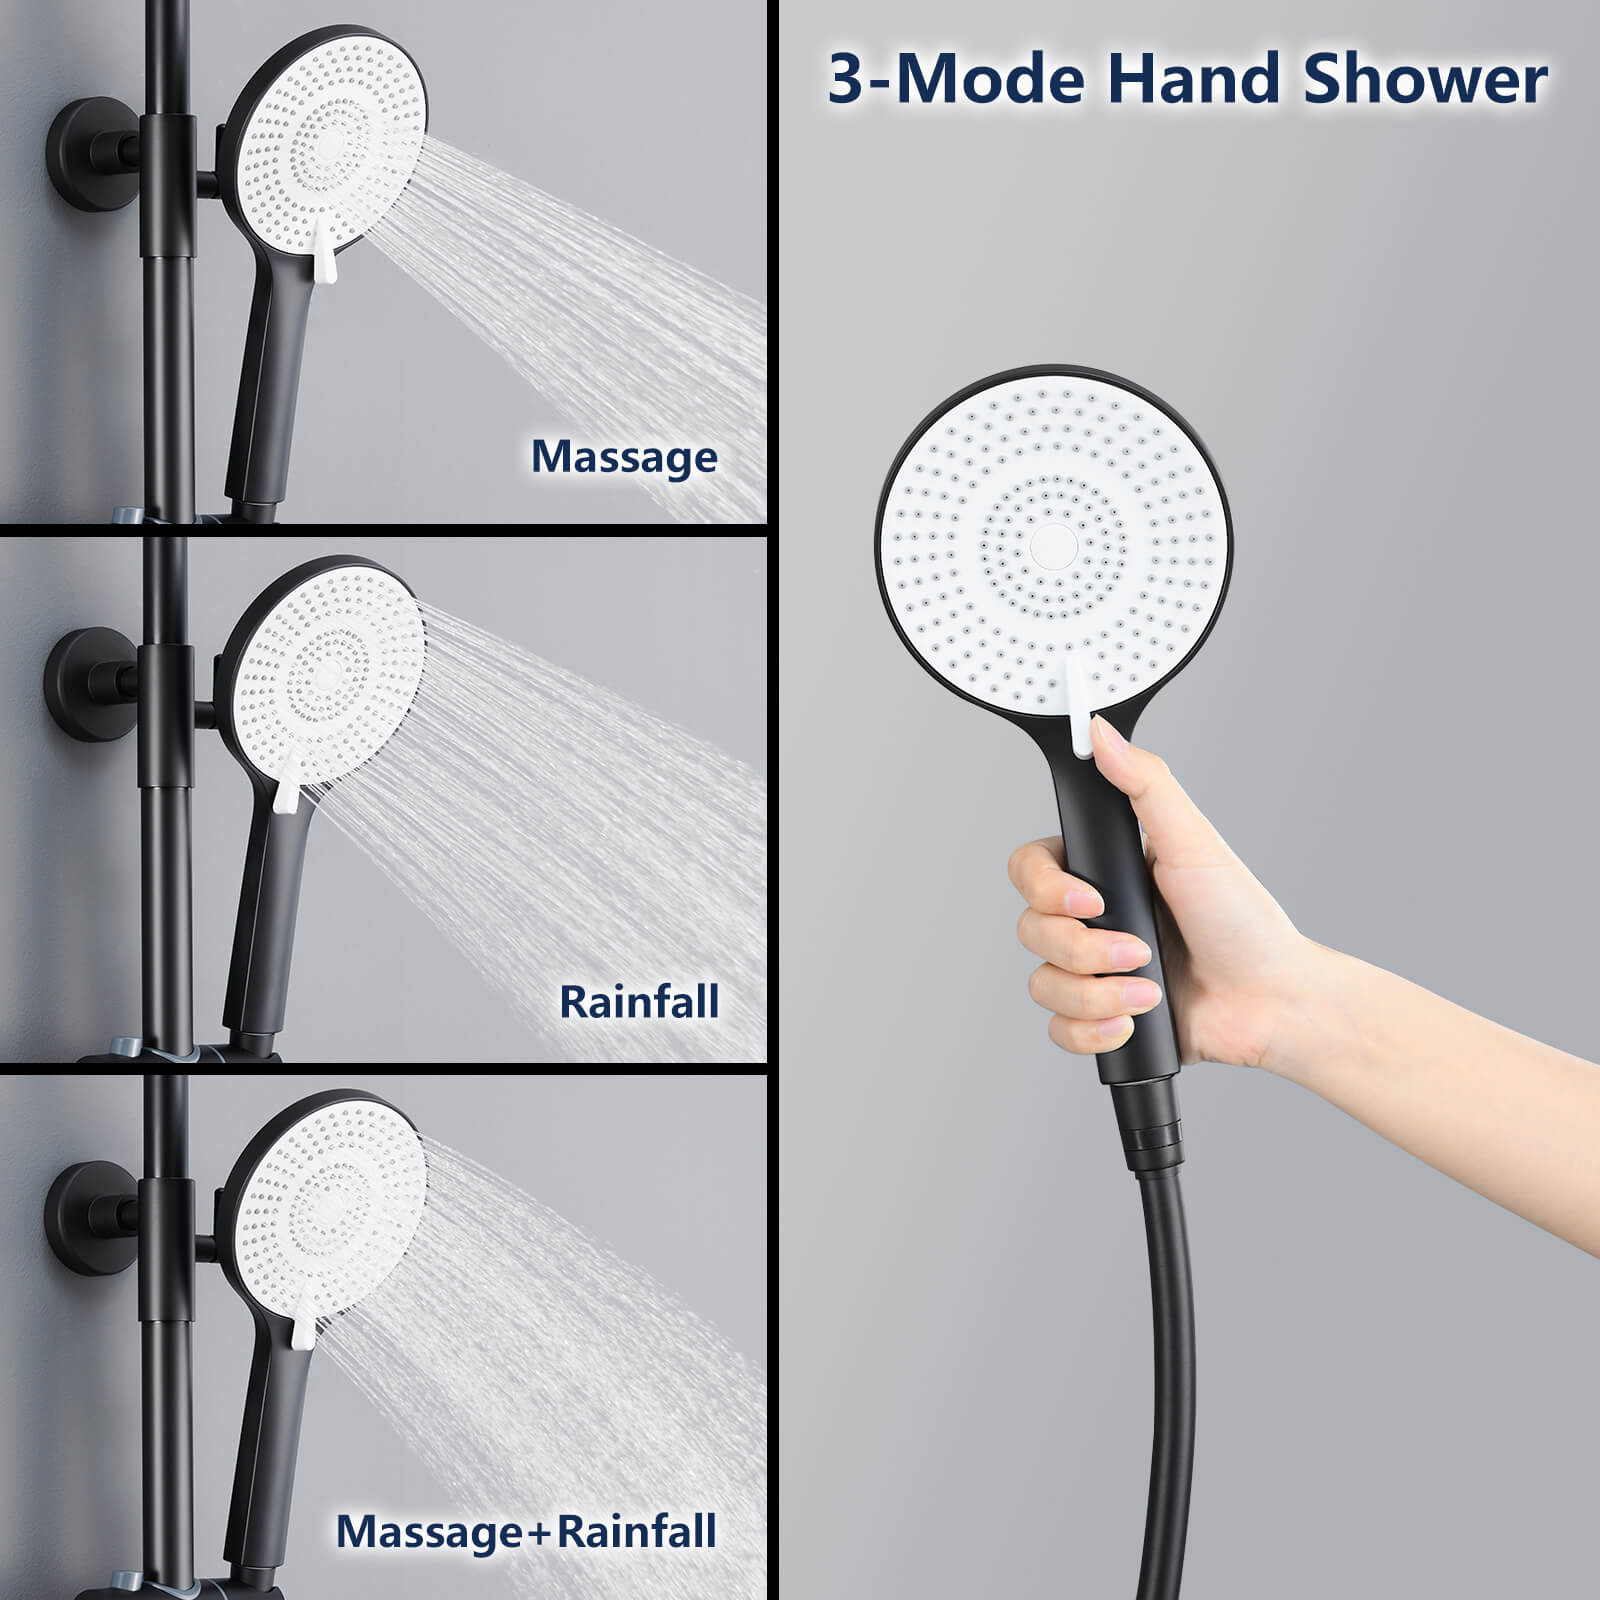 Homelody black shower system with LED temperature display. Adjustable shower rod with shelf